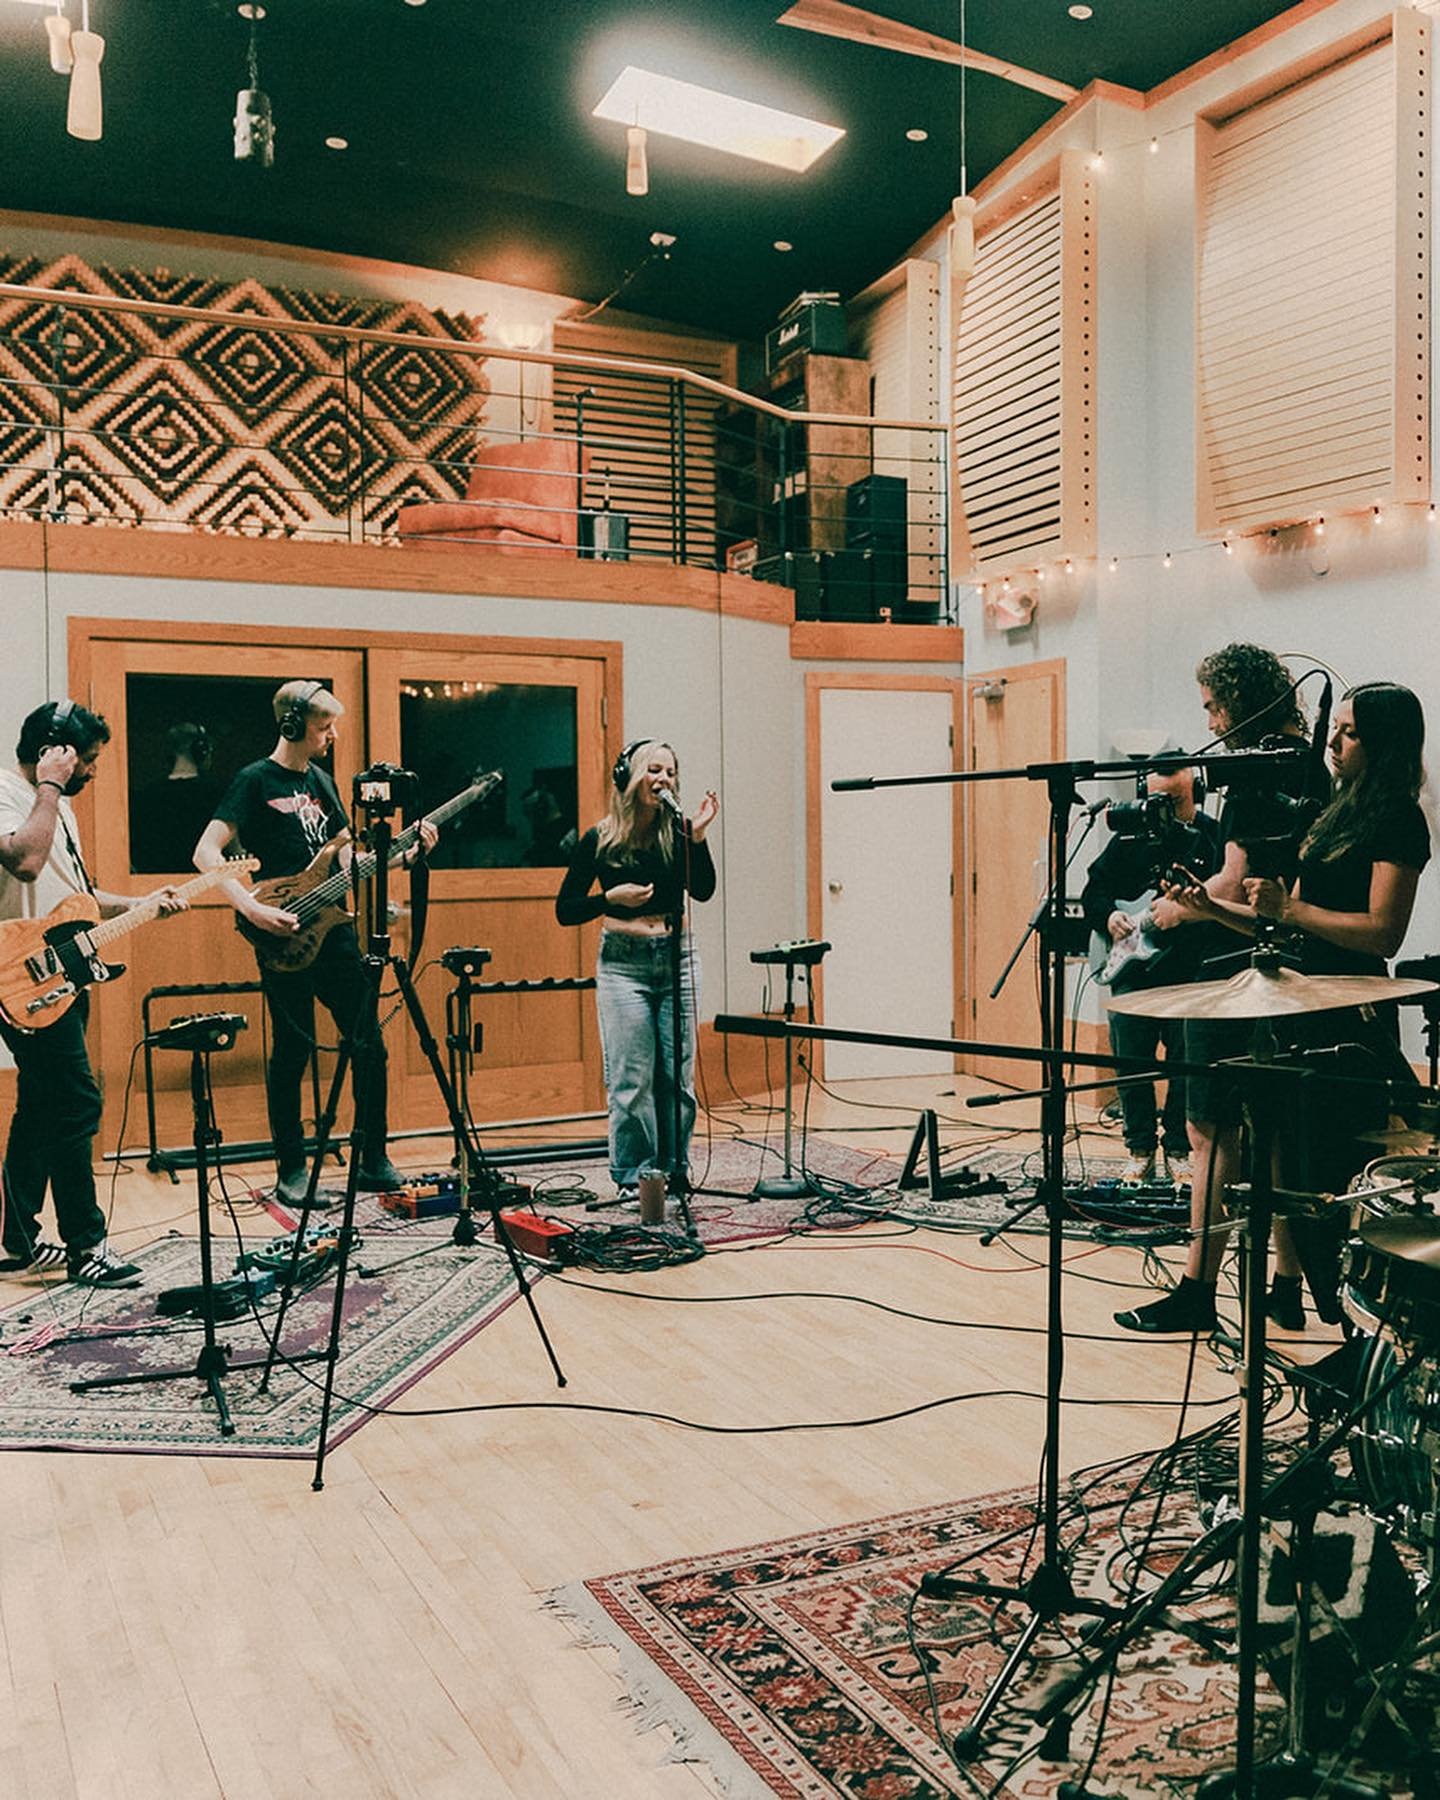 Exciting news! Our album drops this Friday! Check out some behind-the-scenes pics from our recording session. Don&rsquo;t forget to pre-save it - link in bio! ❤️

📸 @mayumix_m 
📍 @raincityrecorders 

#livemusic #vancouverartist #vancouverlife #vanc